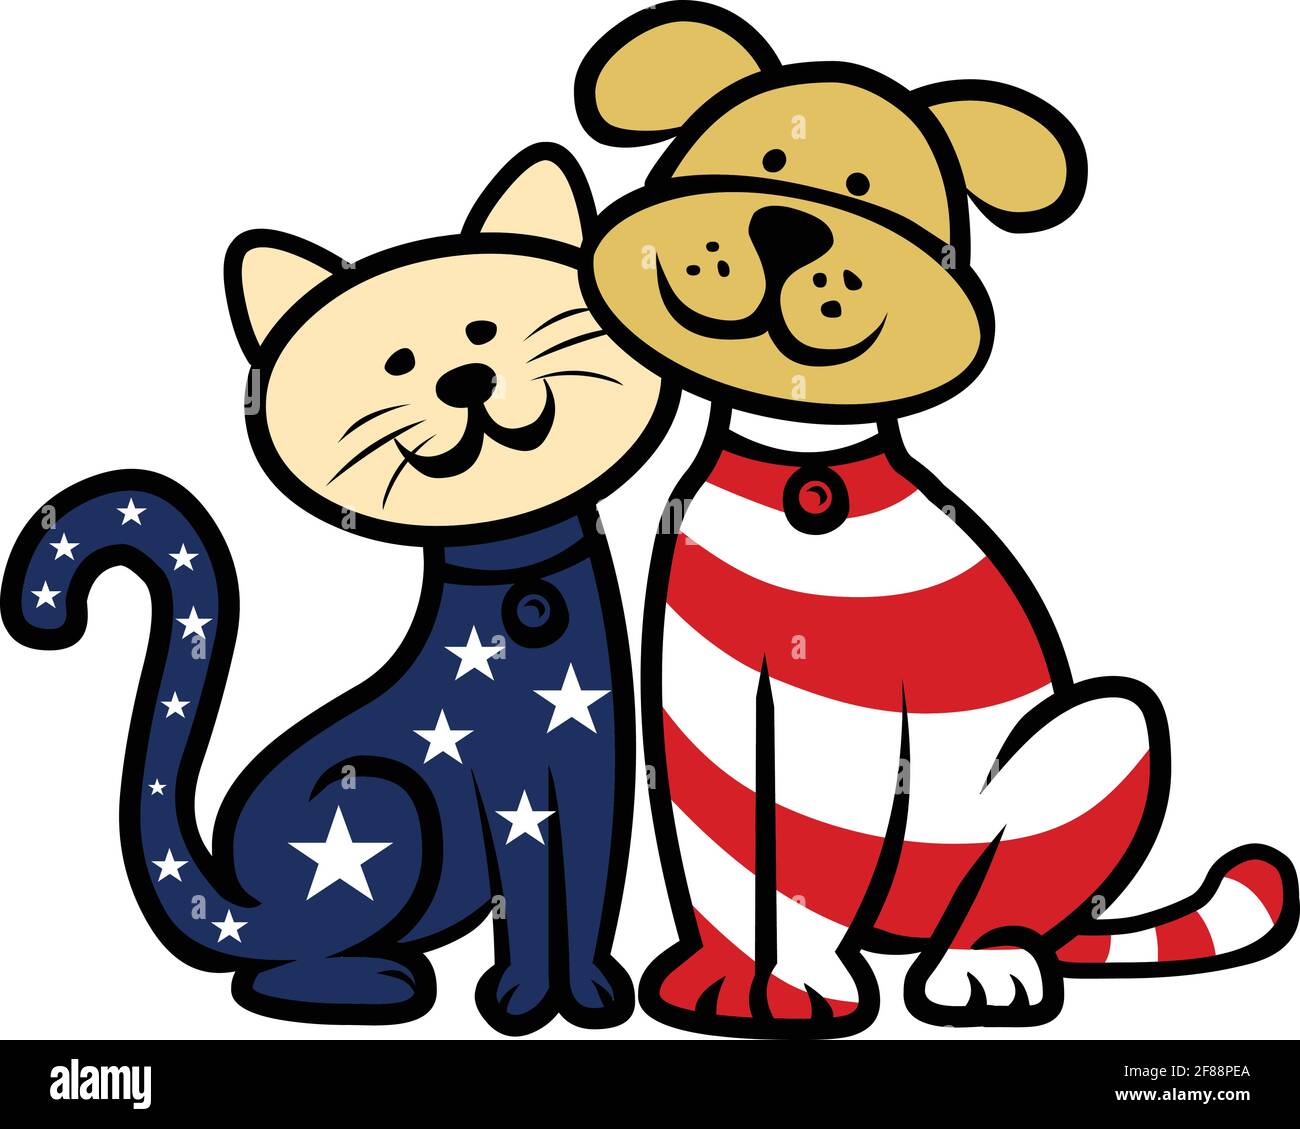 American patriot dog and cat vector illustration isolated on white background Stock Vector